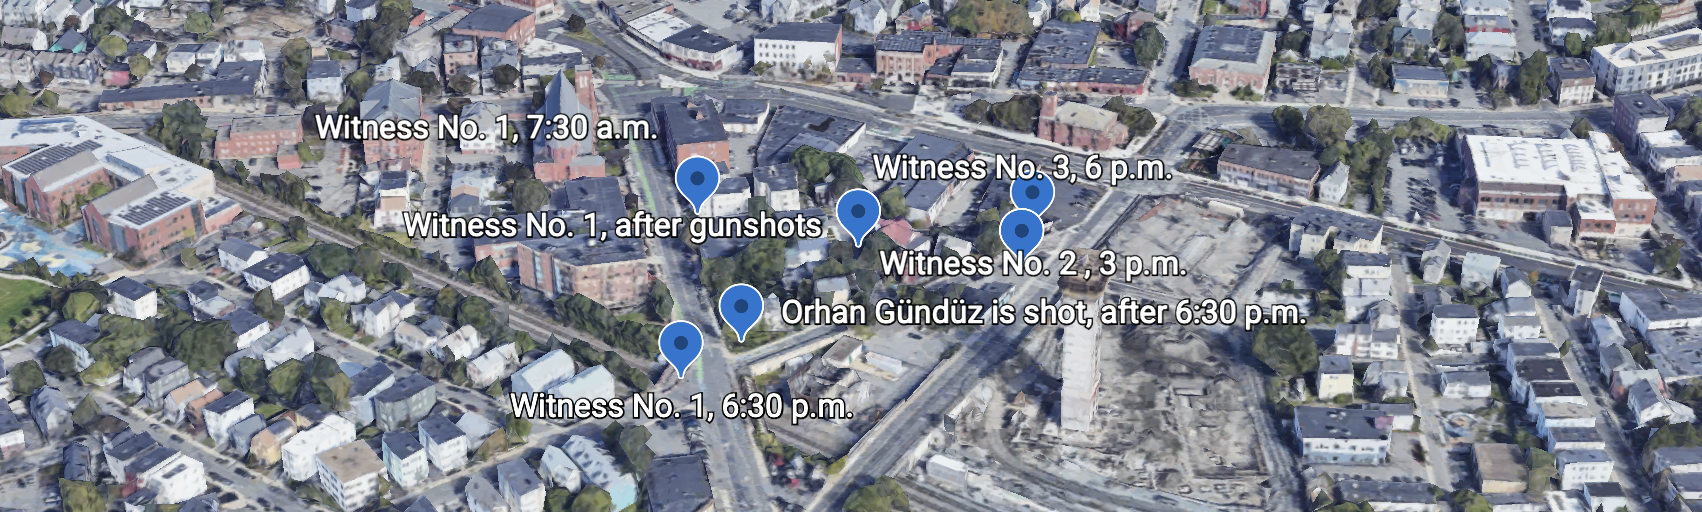 An aerial view of the scene of the shooting, denoting the locations of eye witnesses throughout the day